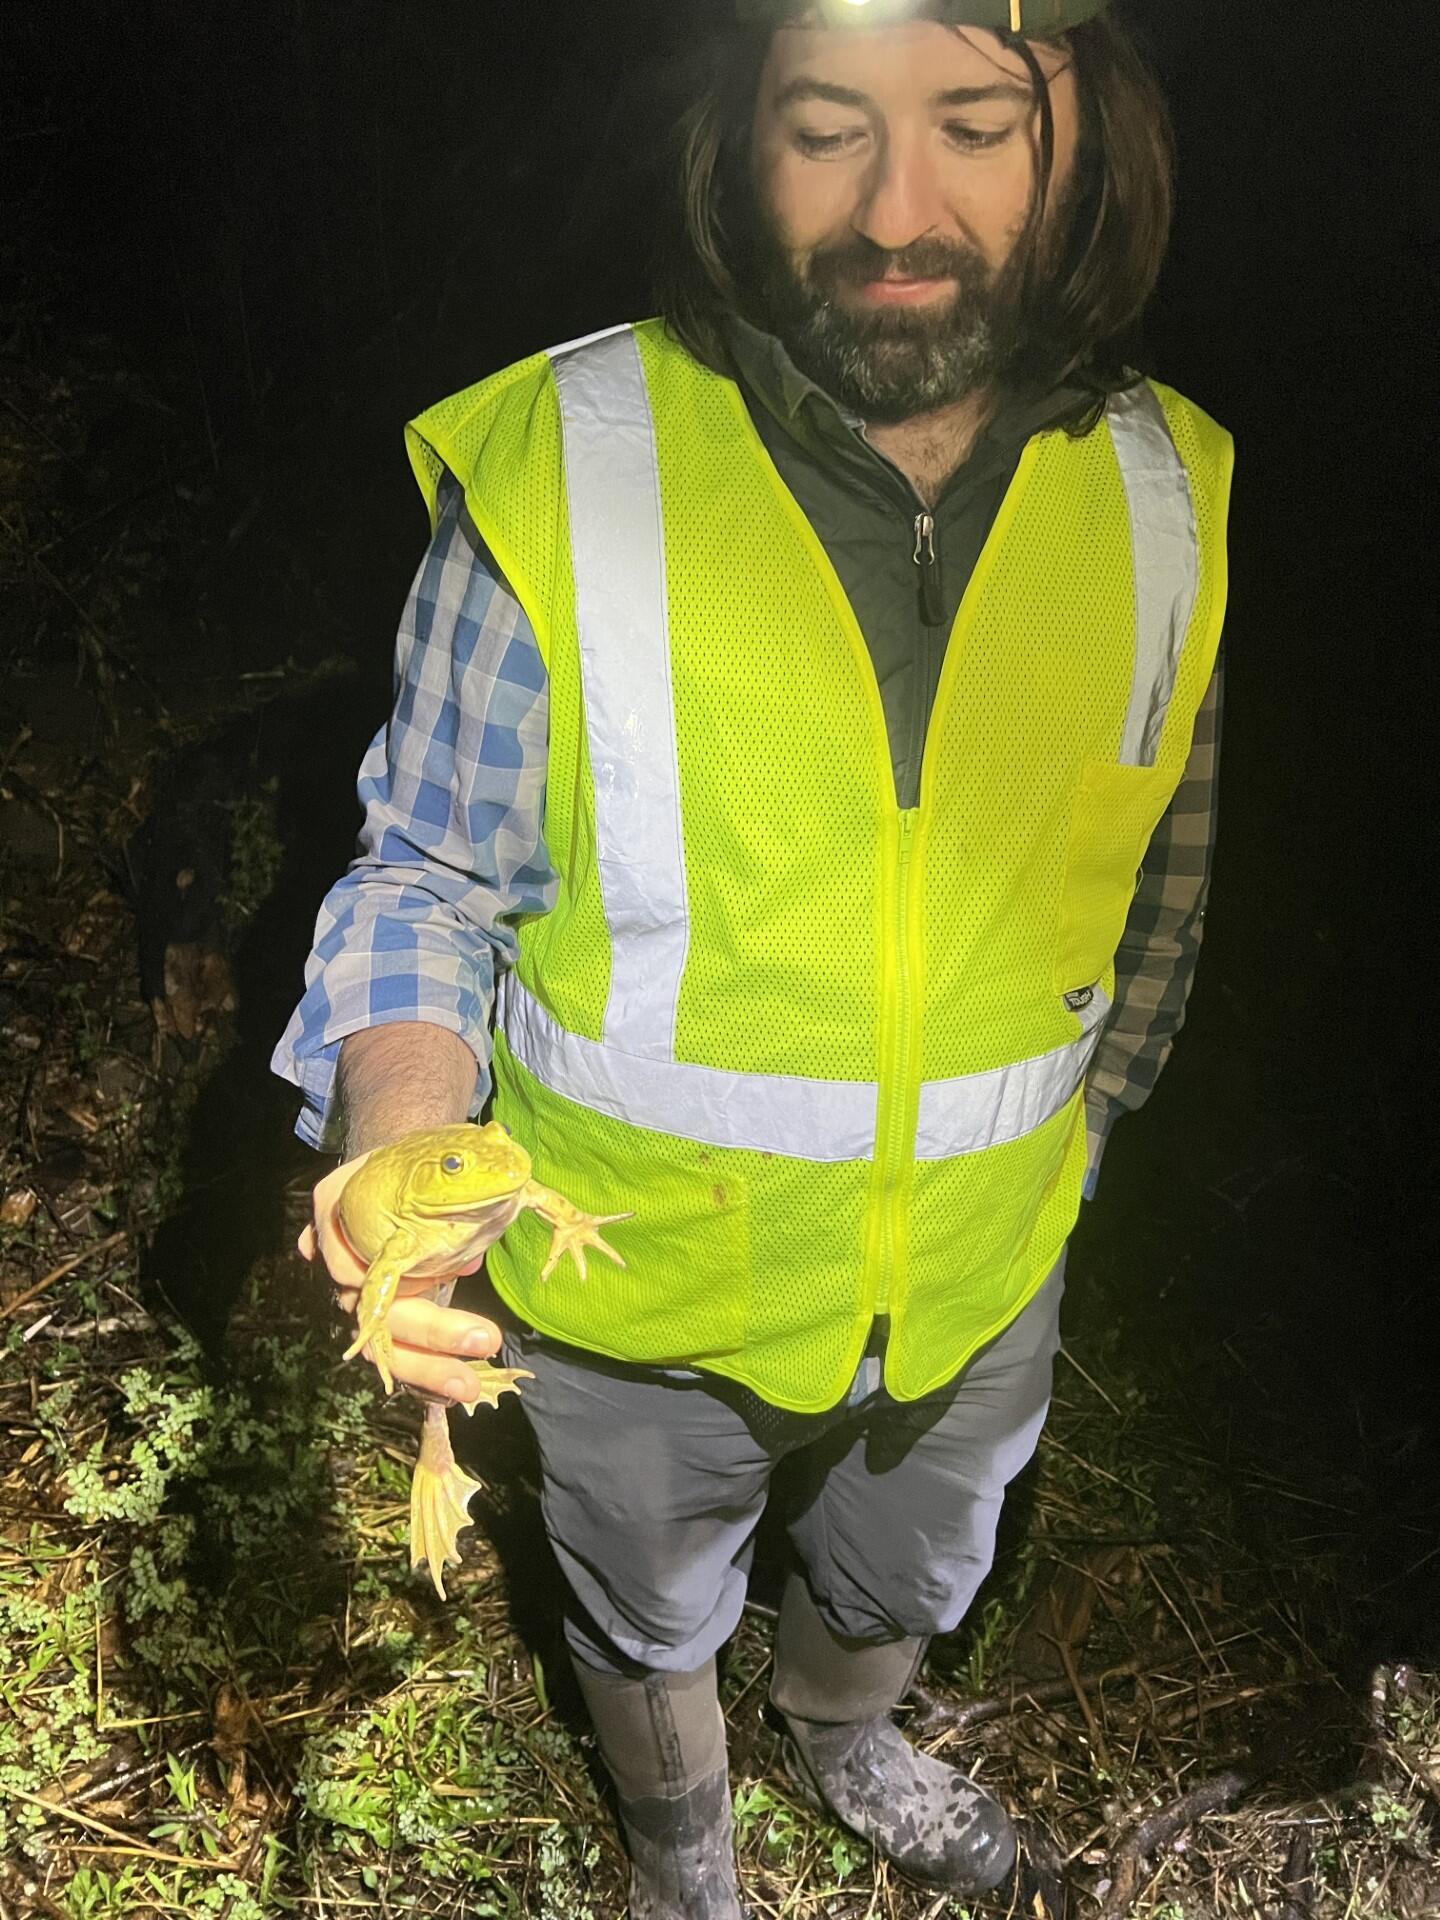 Matthew Gordon photographed at night wearing a reflective safety vest and a headlamp. He is holding a bullfrog.